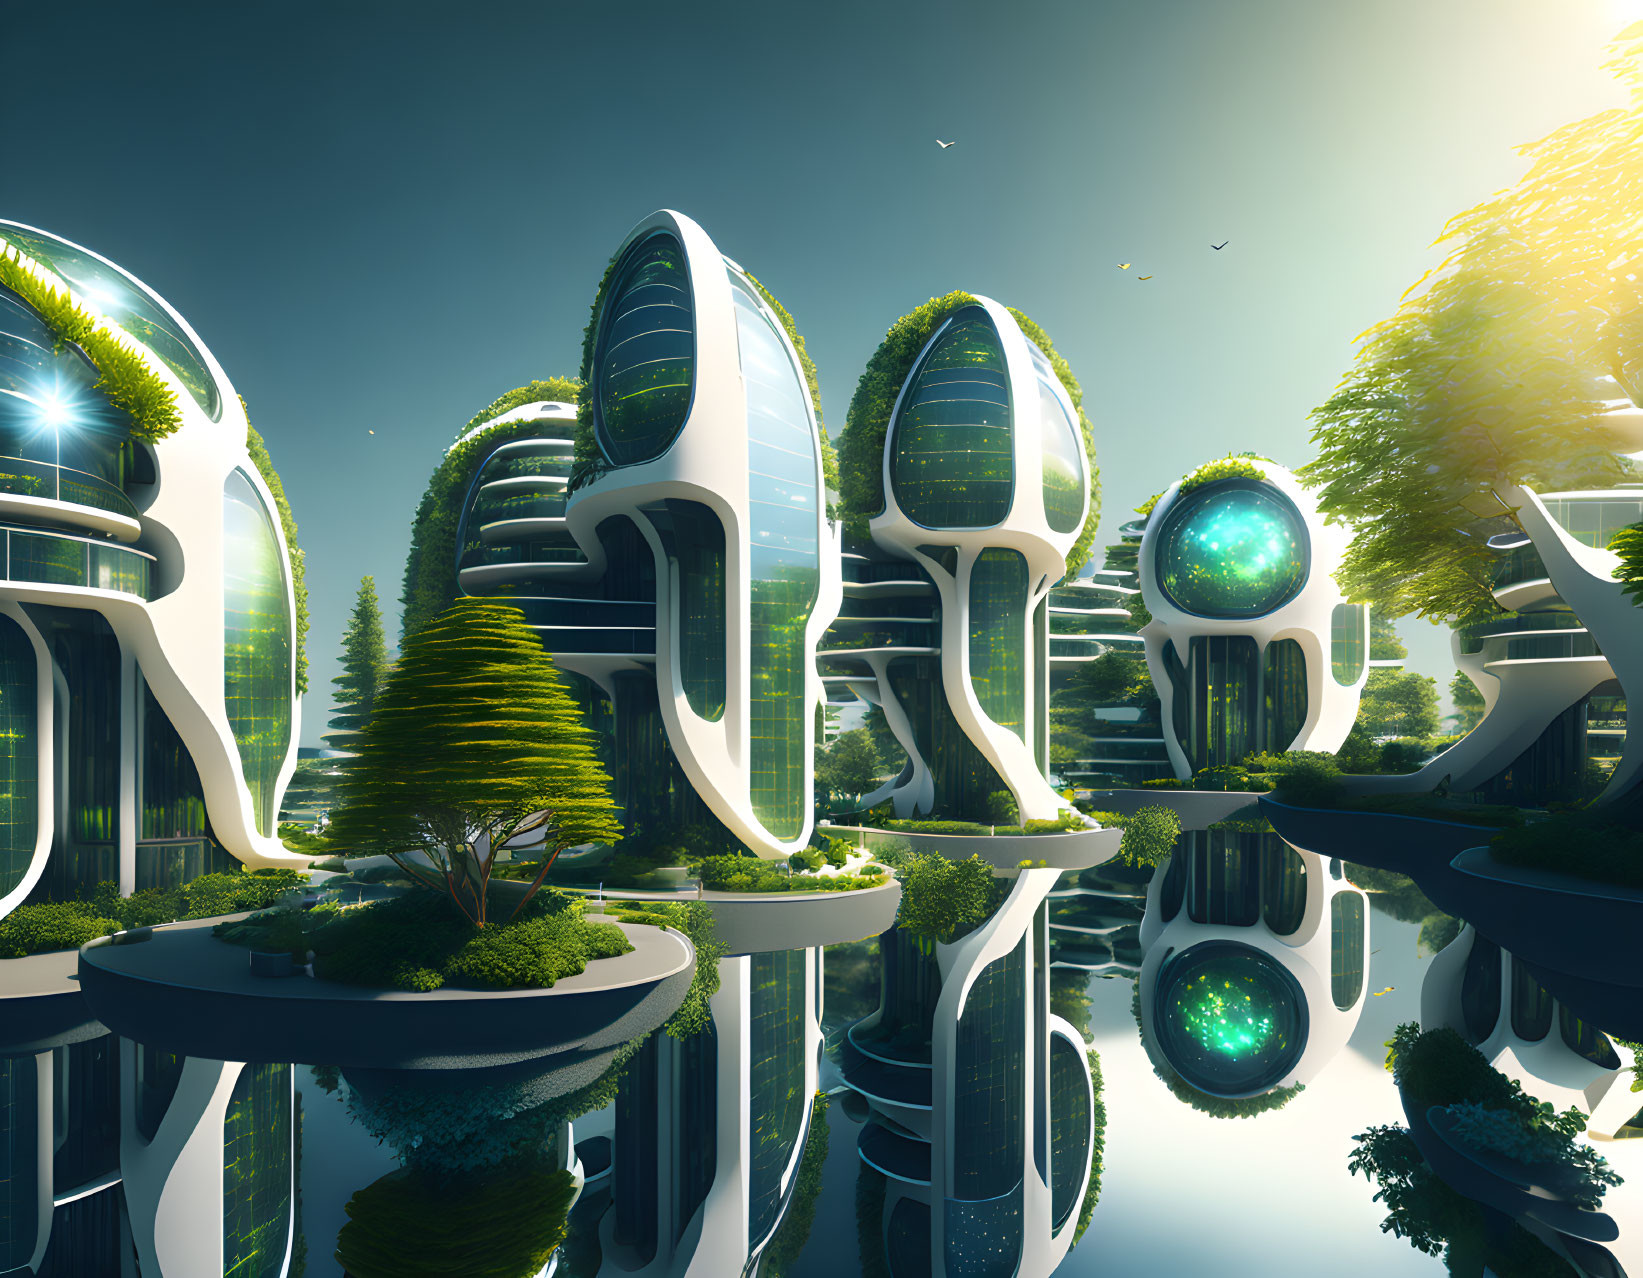 Futuristic cityscape with greenery, curved buildings, water reflection, and birds in clear sky